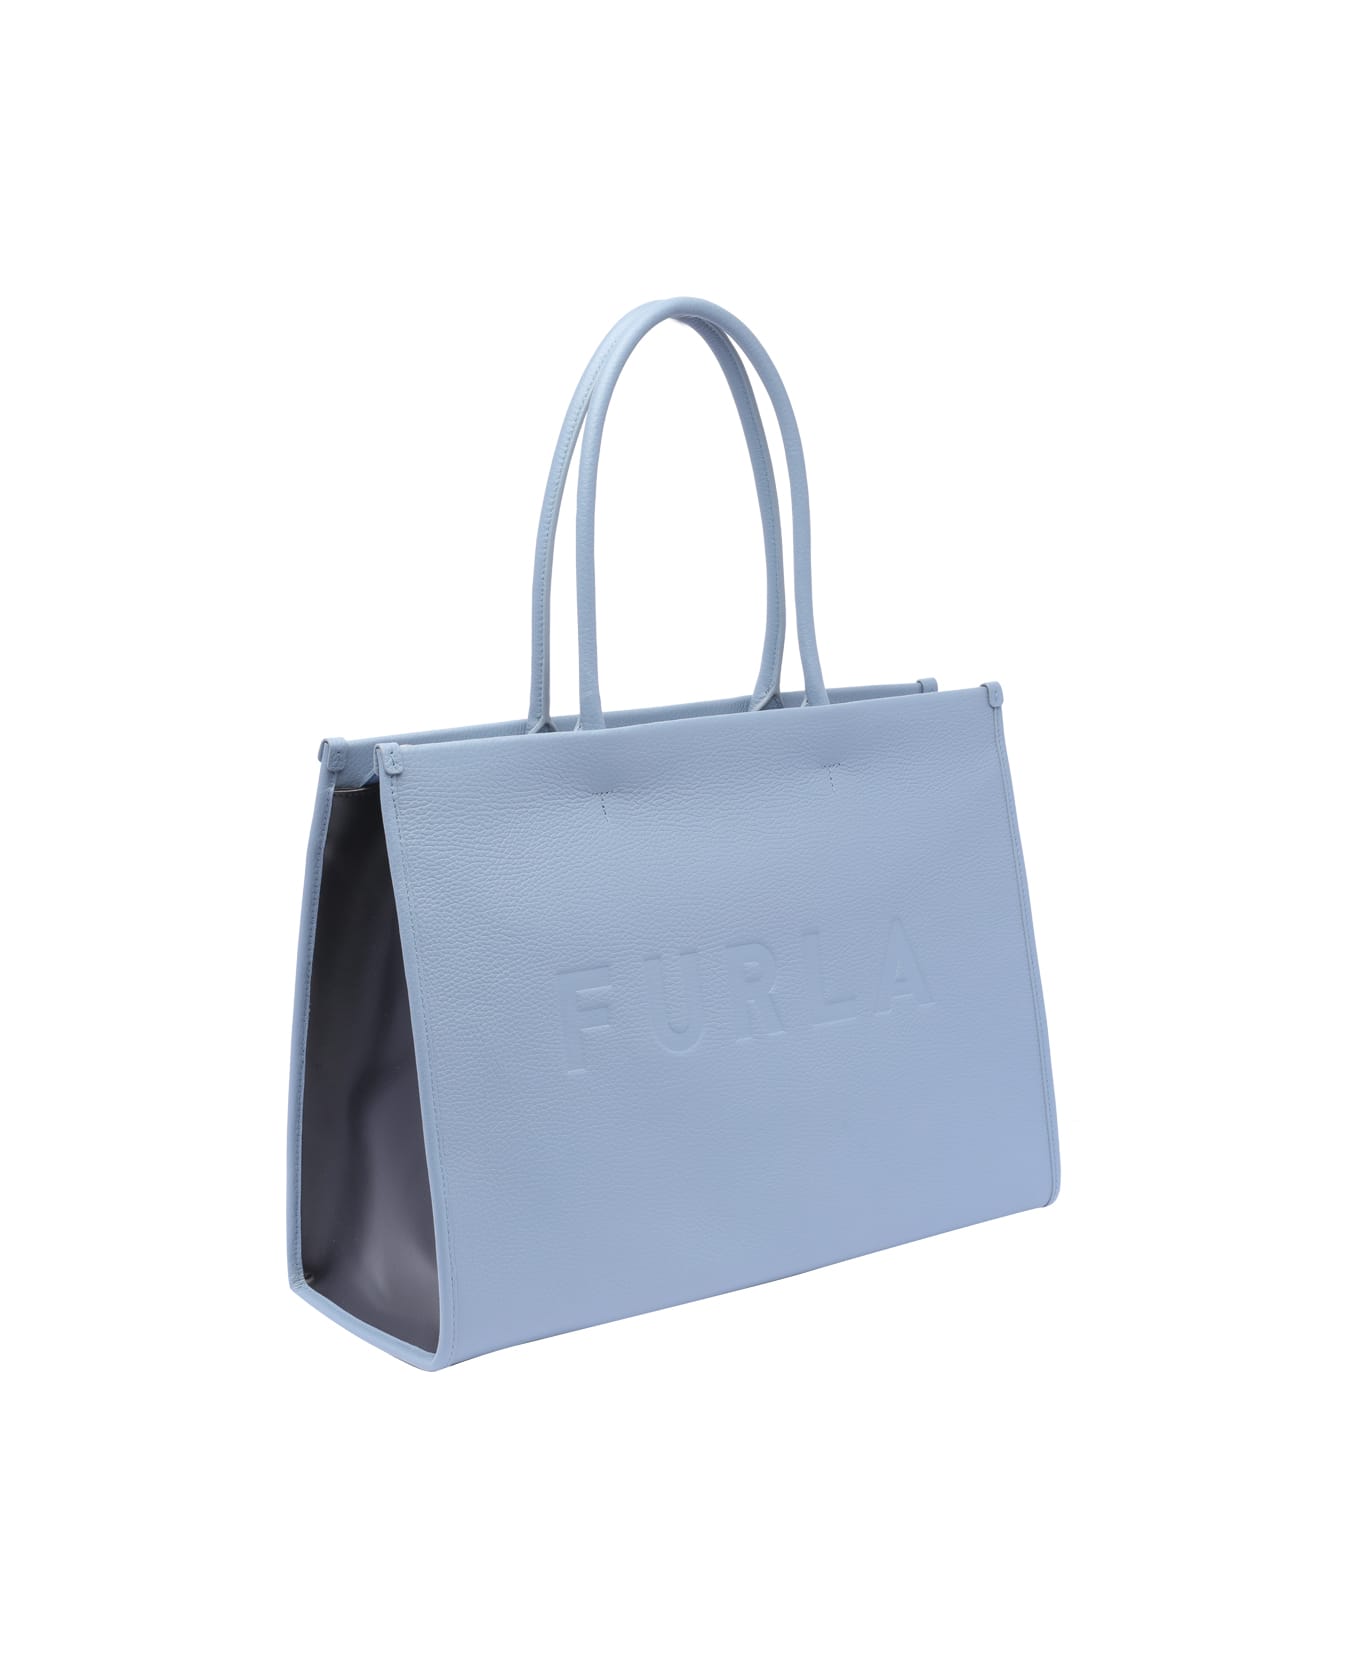 Furla Opportunity Tote Bag - Blue トートバッグ